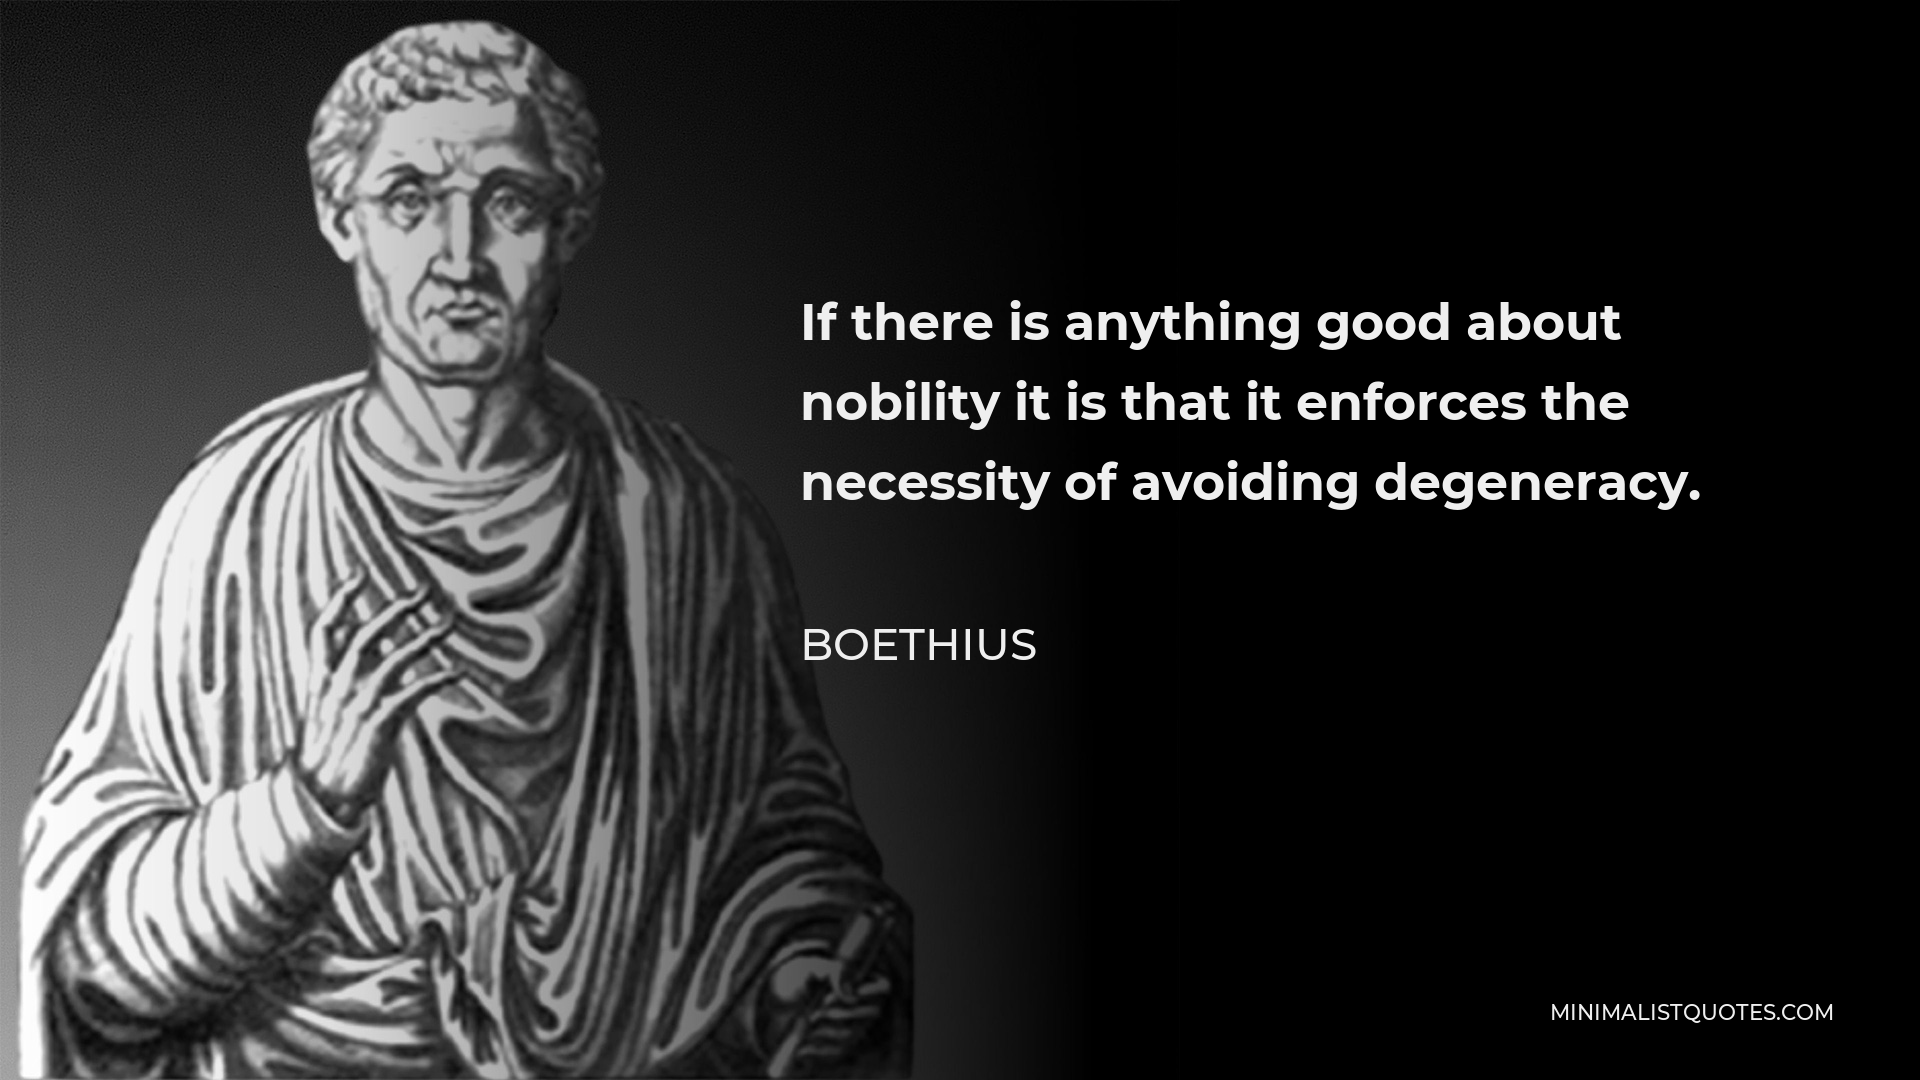 Boethius Quote - If there is anything good about nobility it is that it enforces the necessity of avoiding degeneracy.